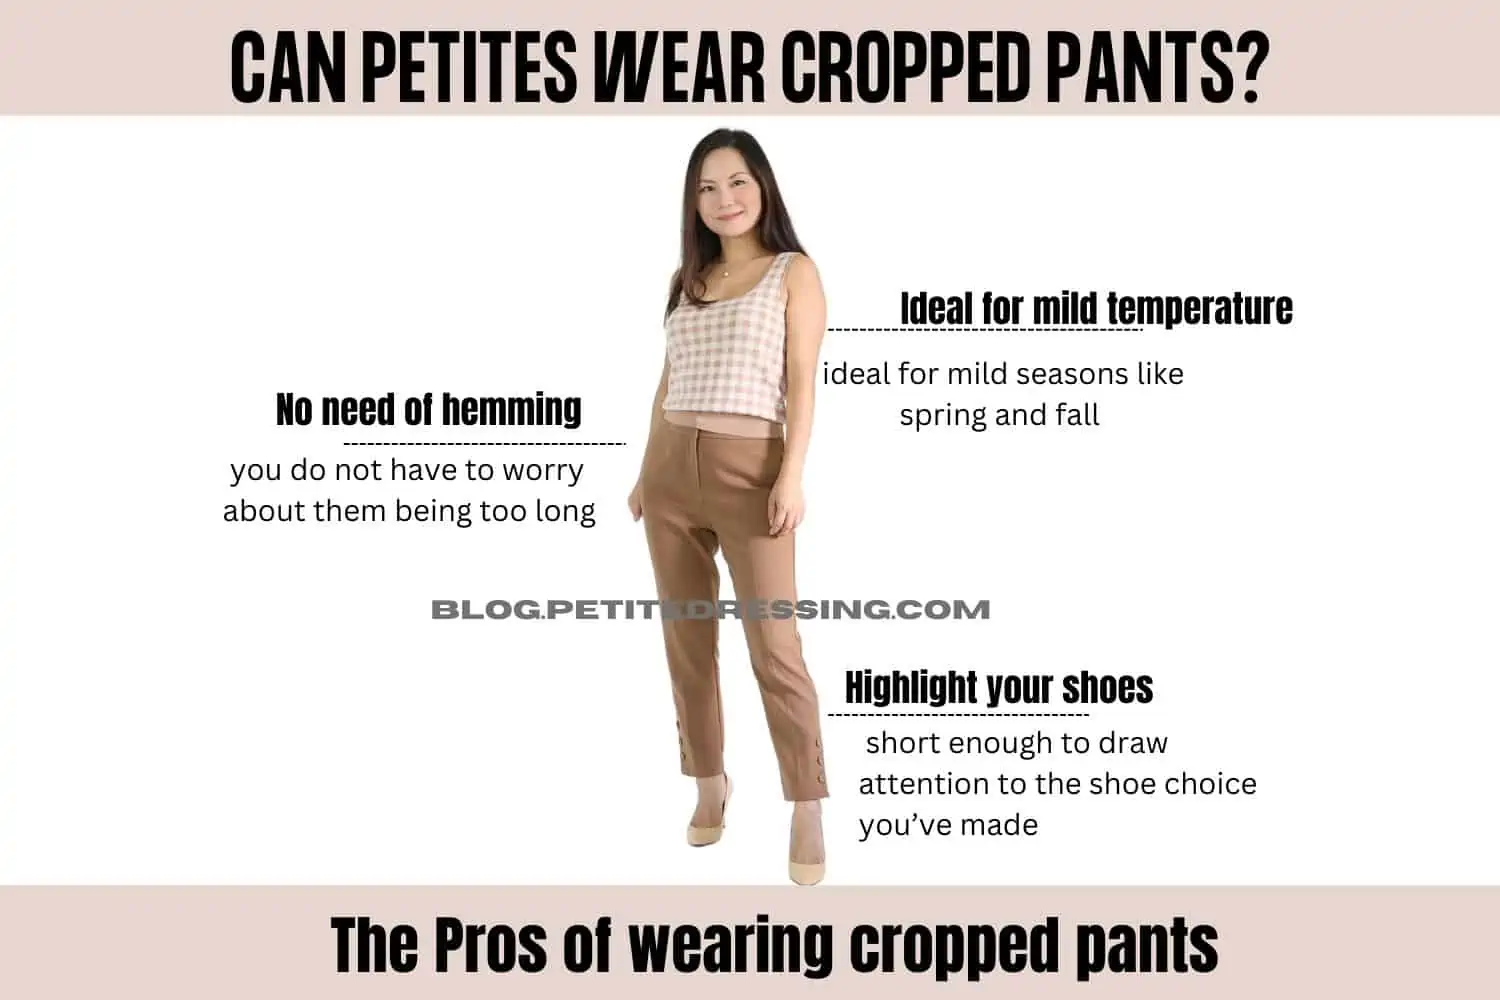 Can You Wear Cropped Pants if You're Short?